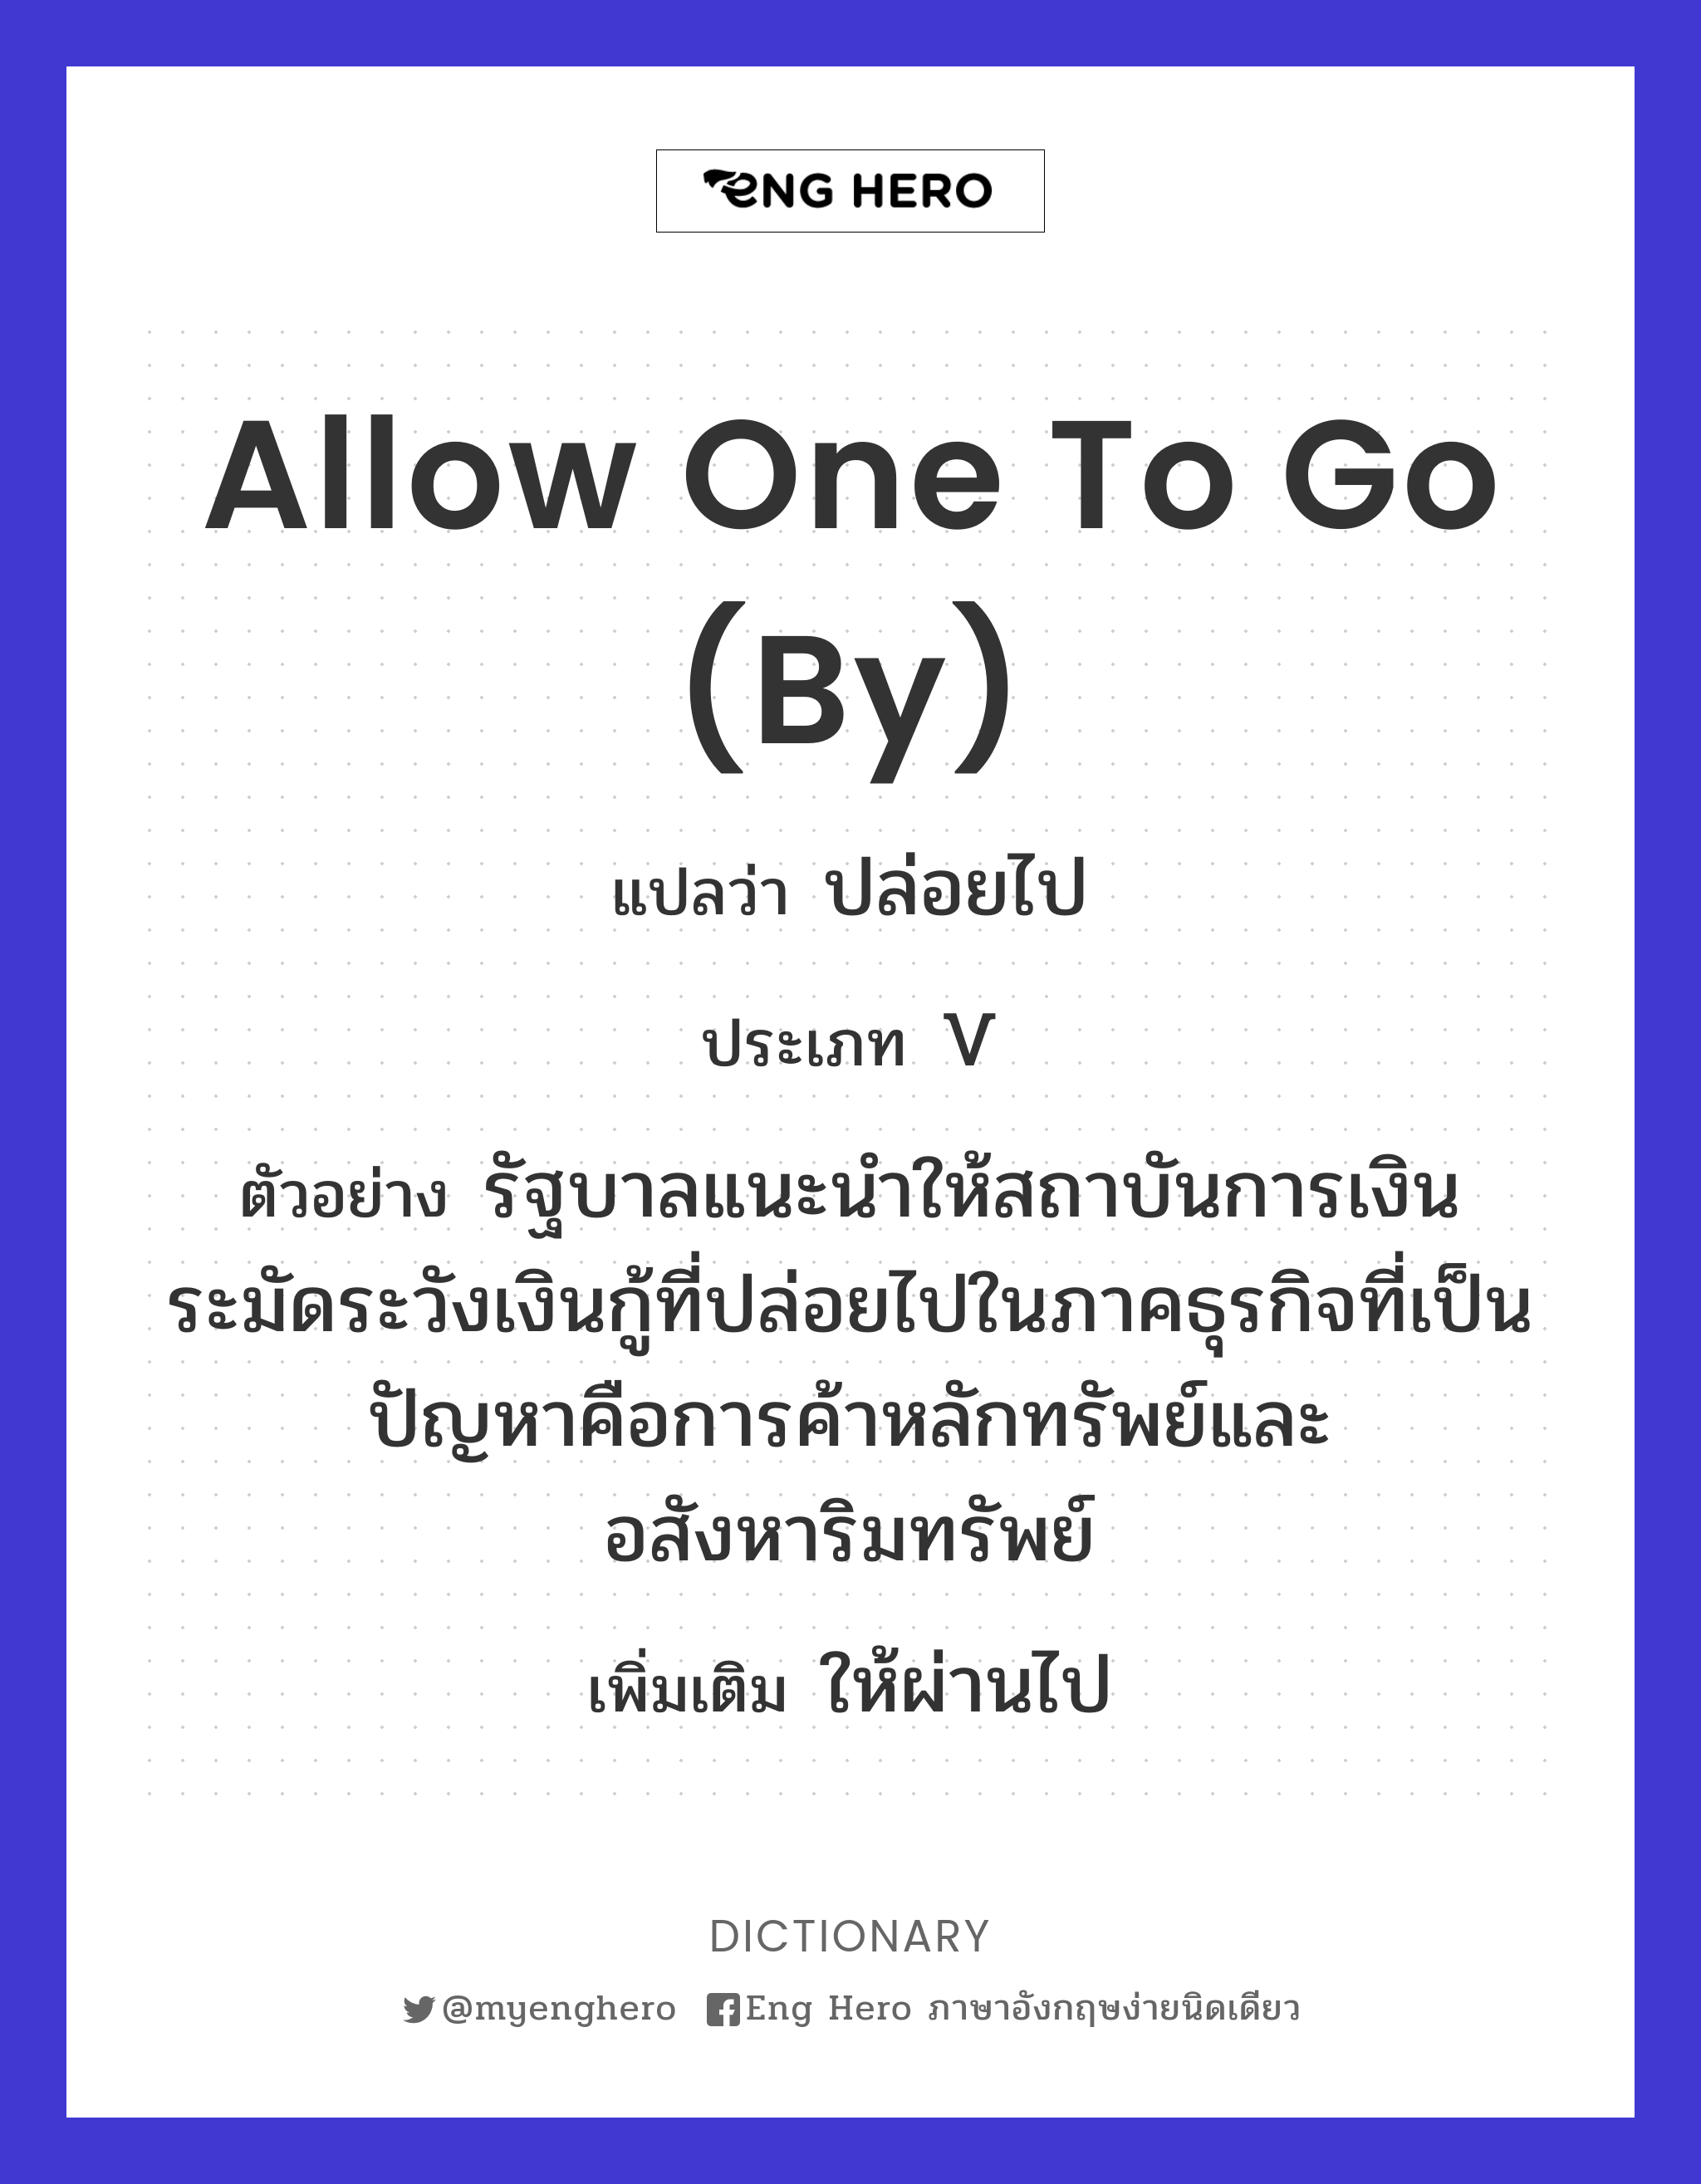 allow one to go (by)